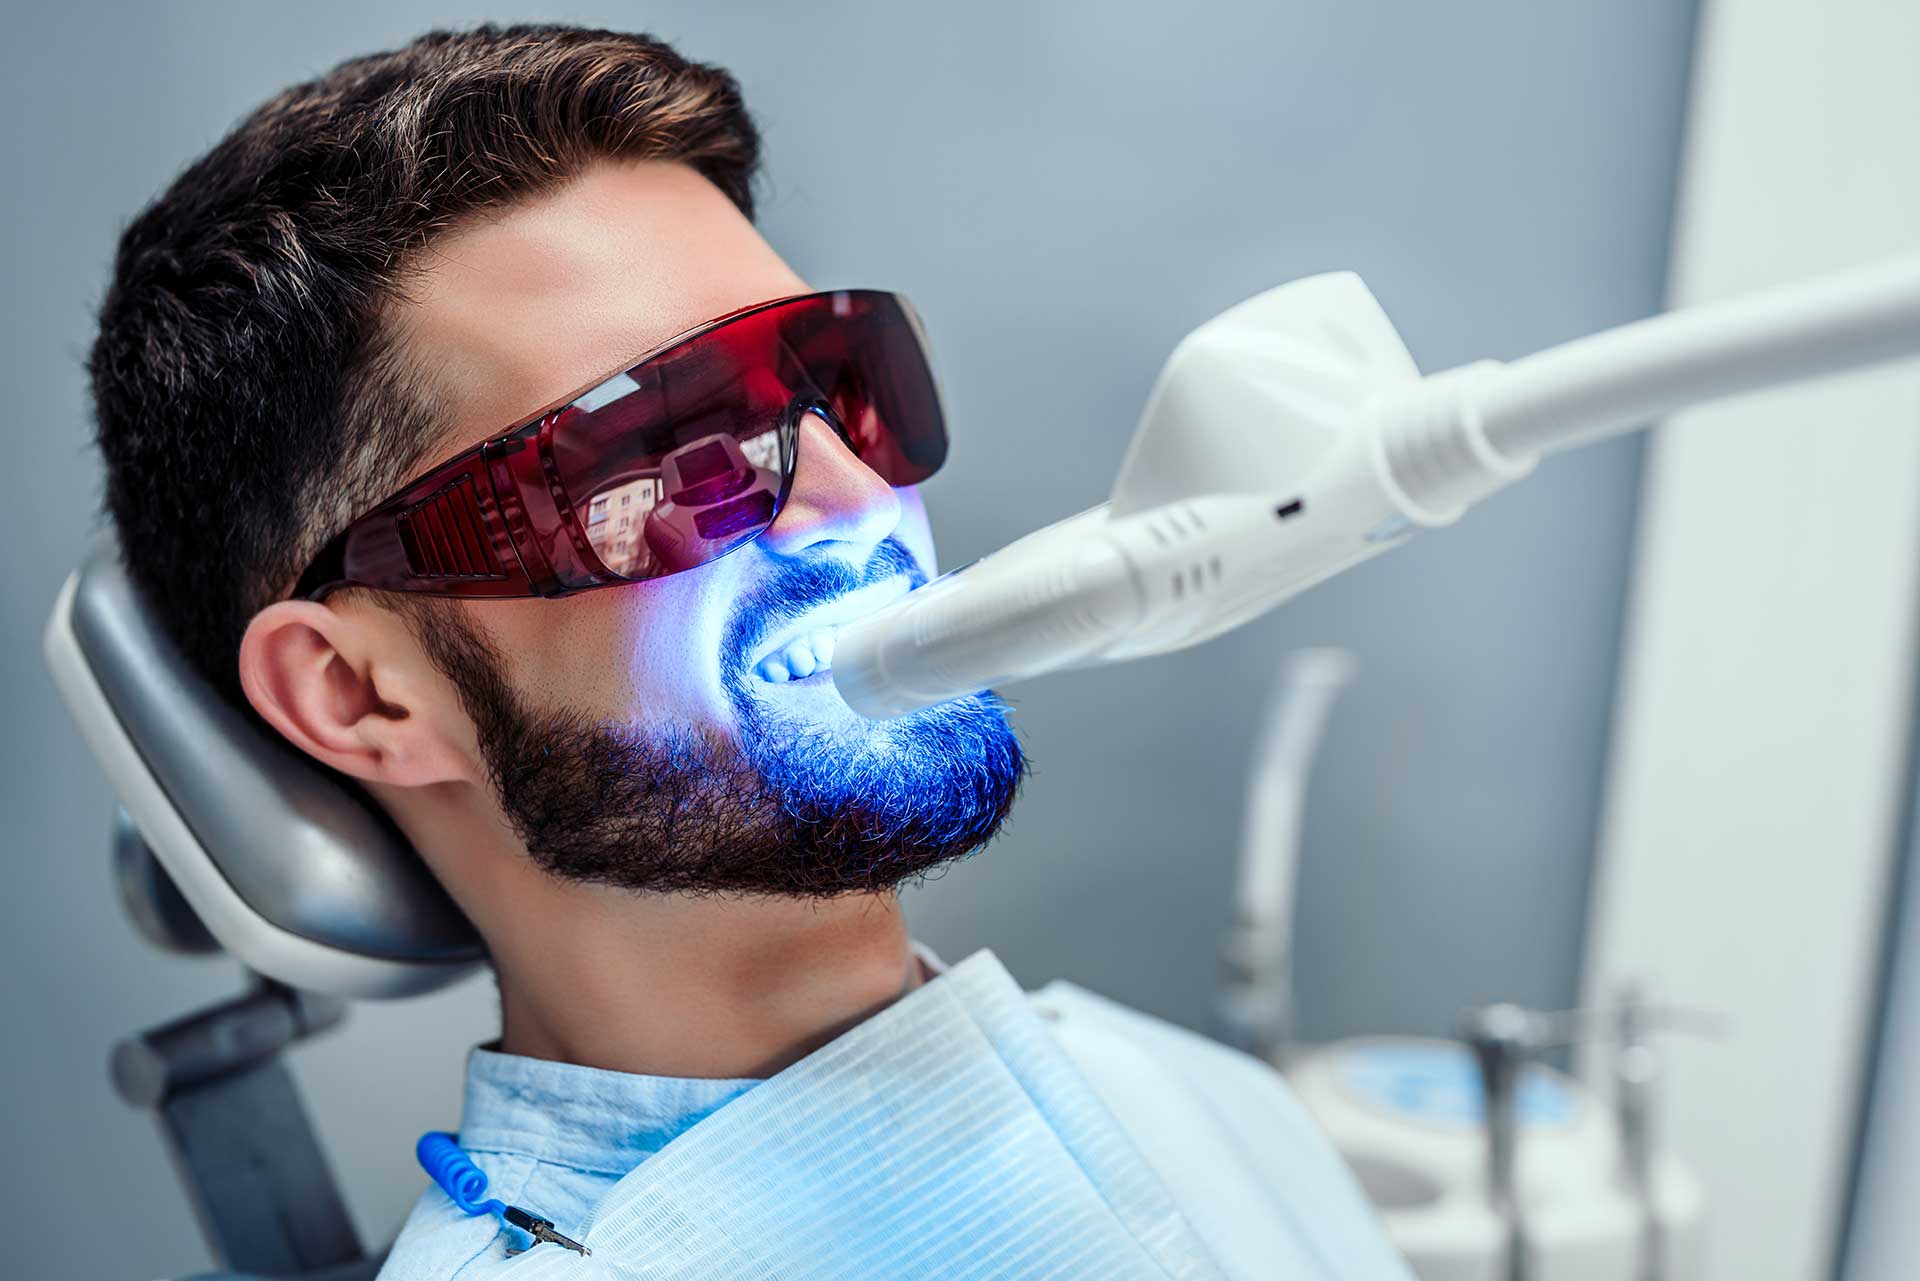 What You Need to Know About Teeth Whitening